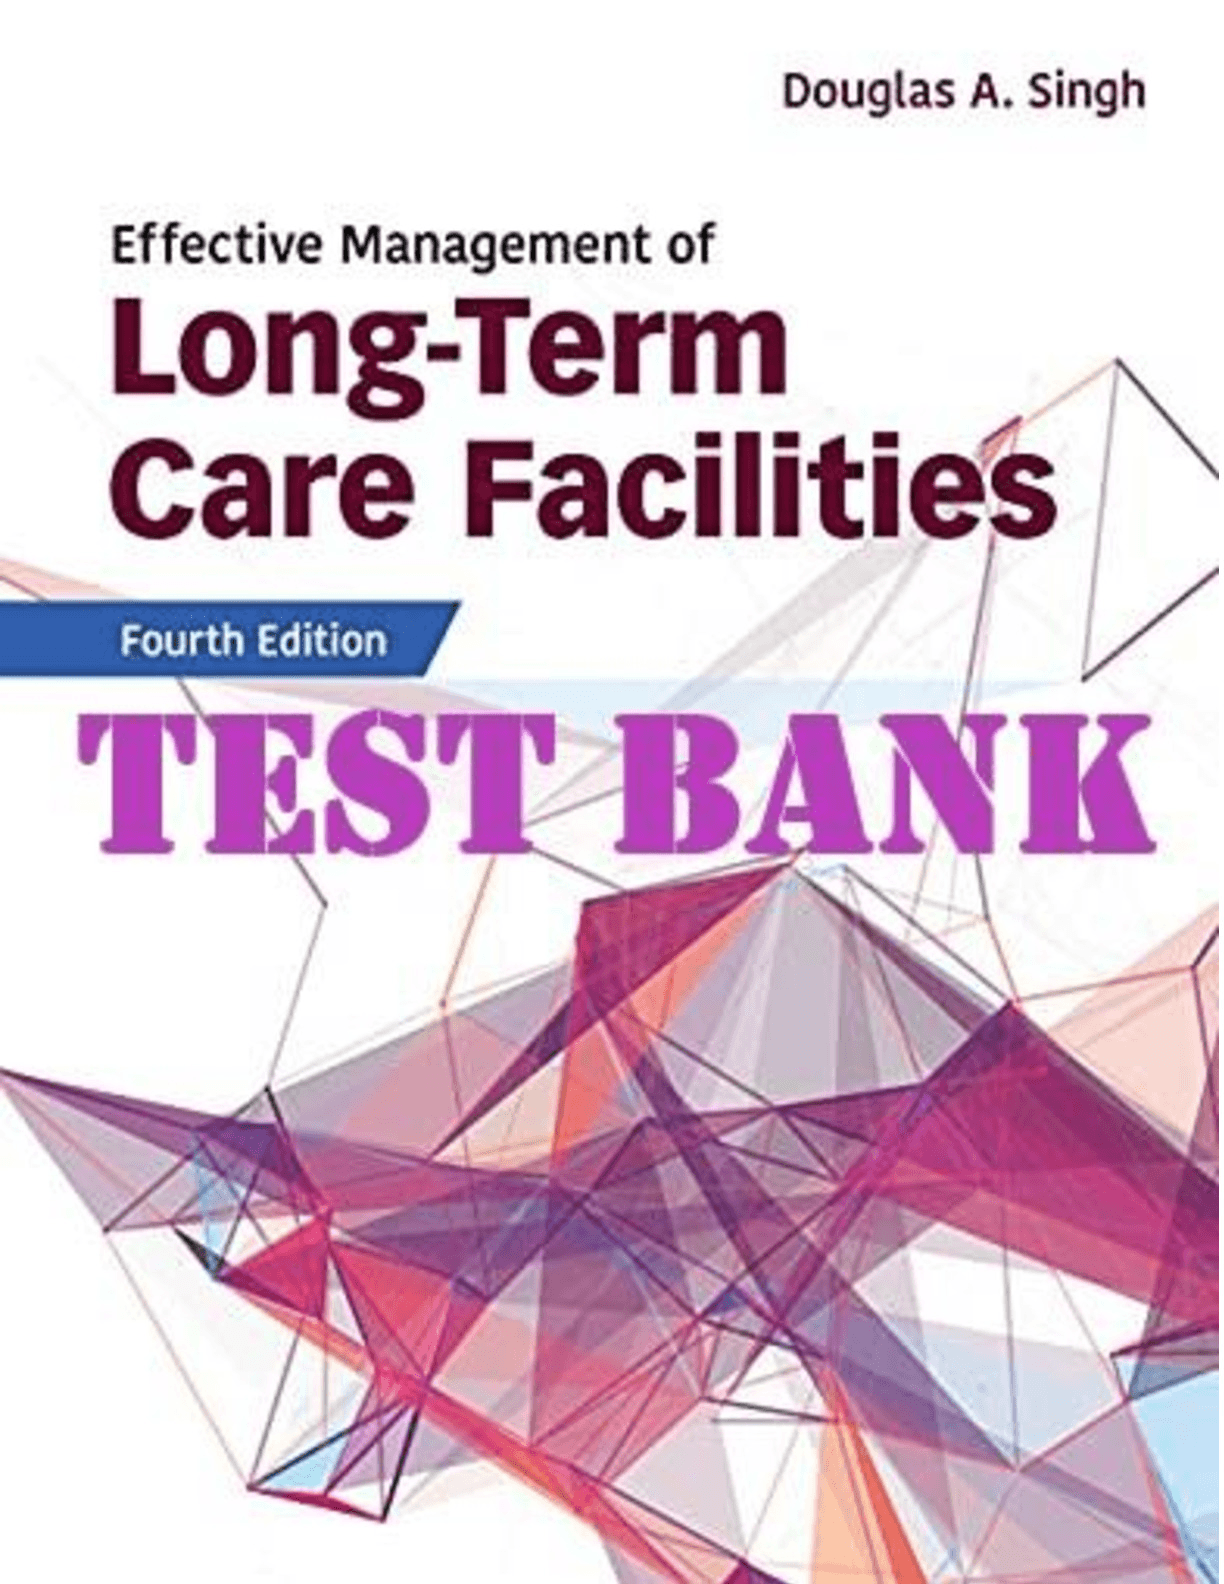 Effective Management of Long-Term Care Facilities, Fourth Edition..